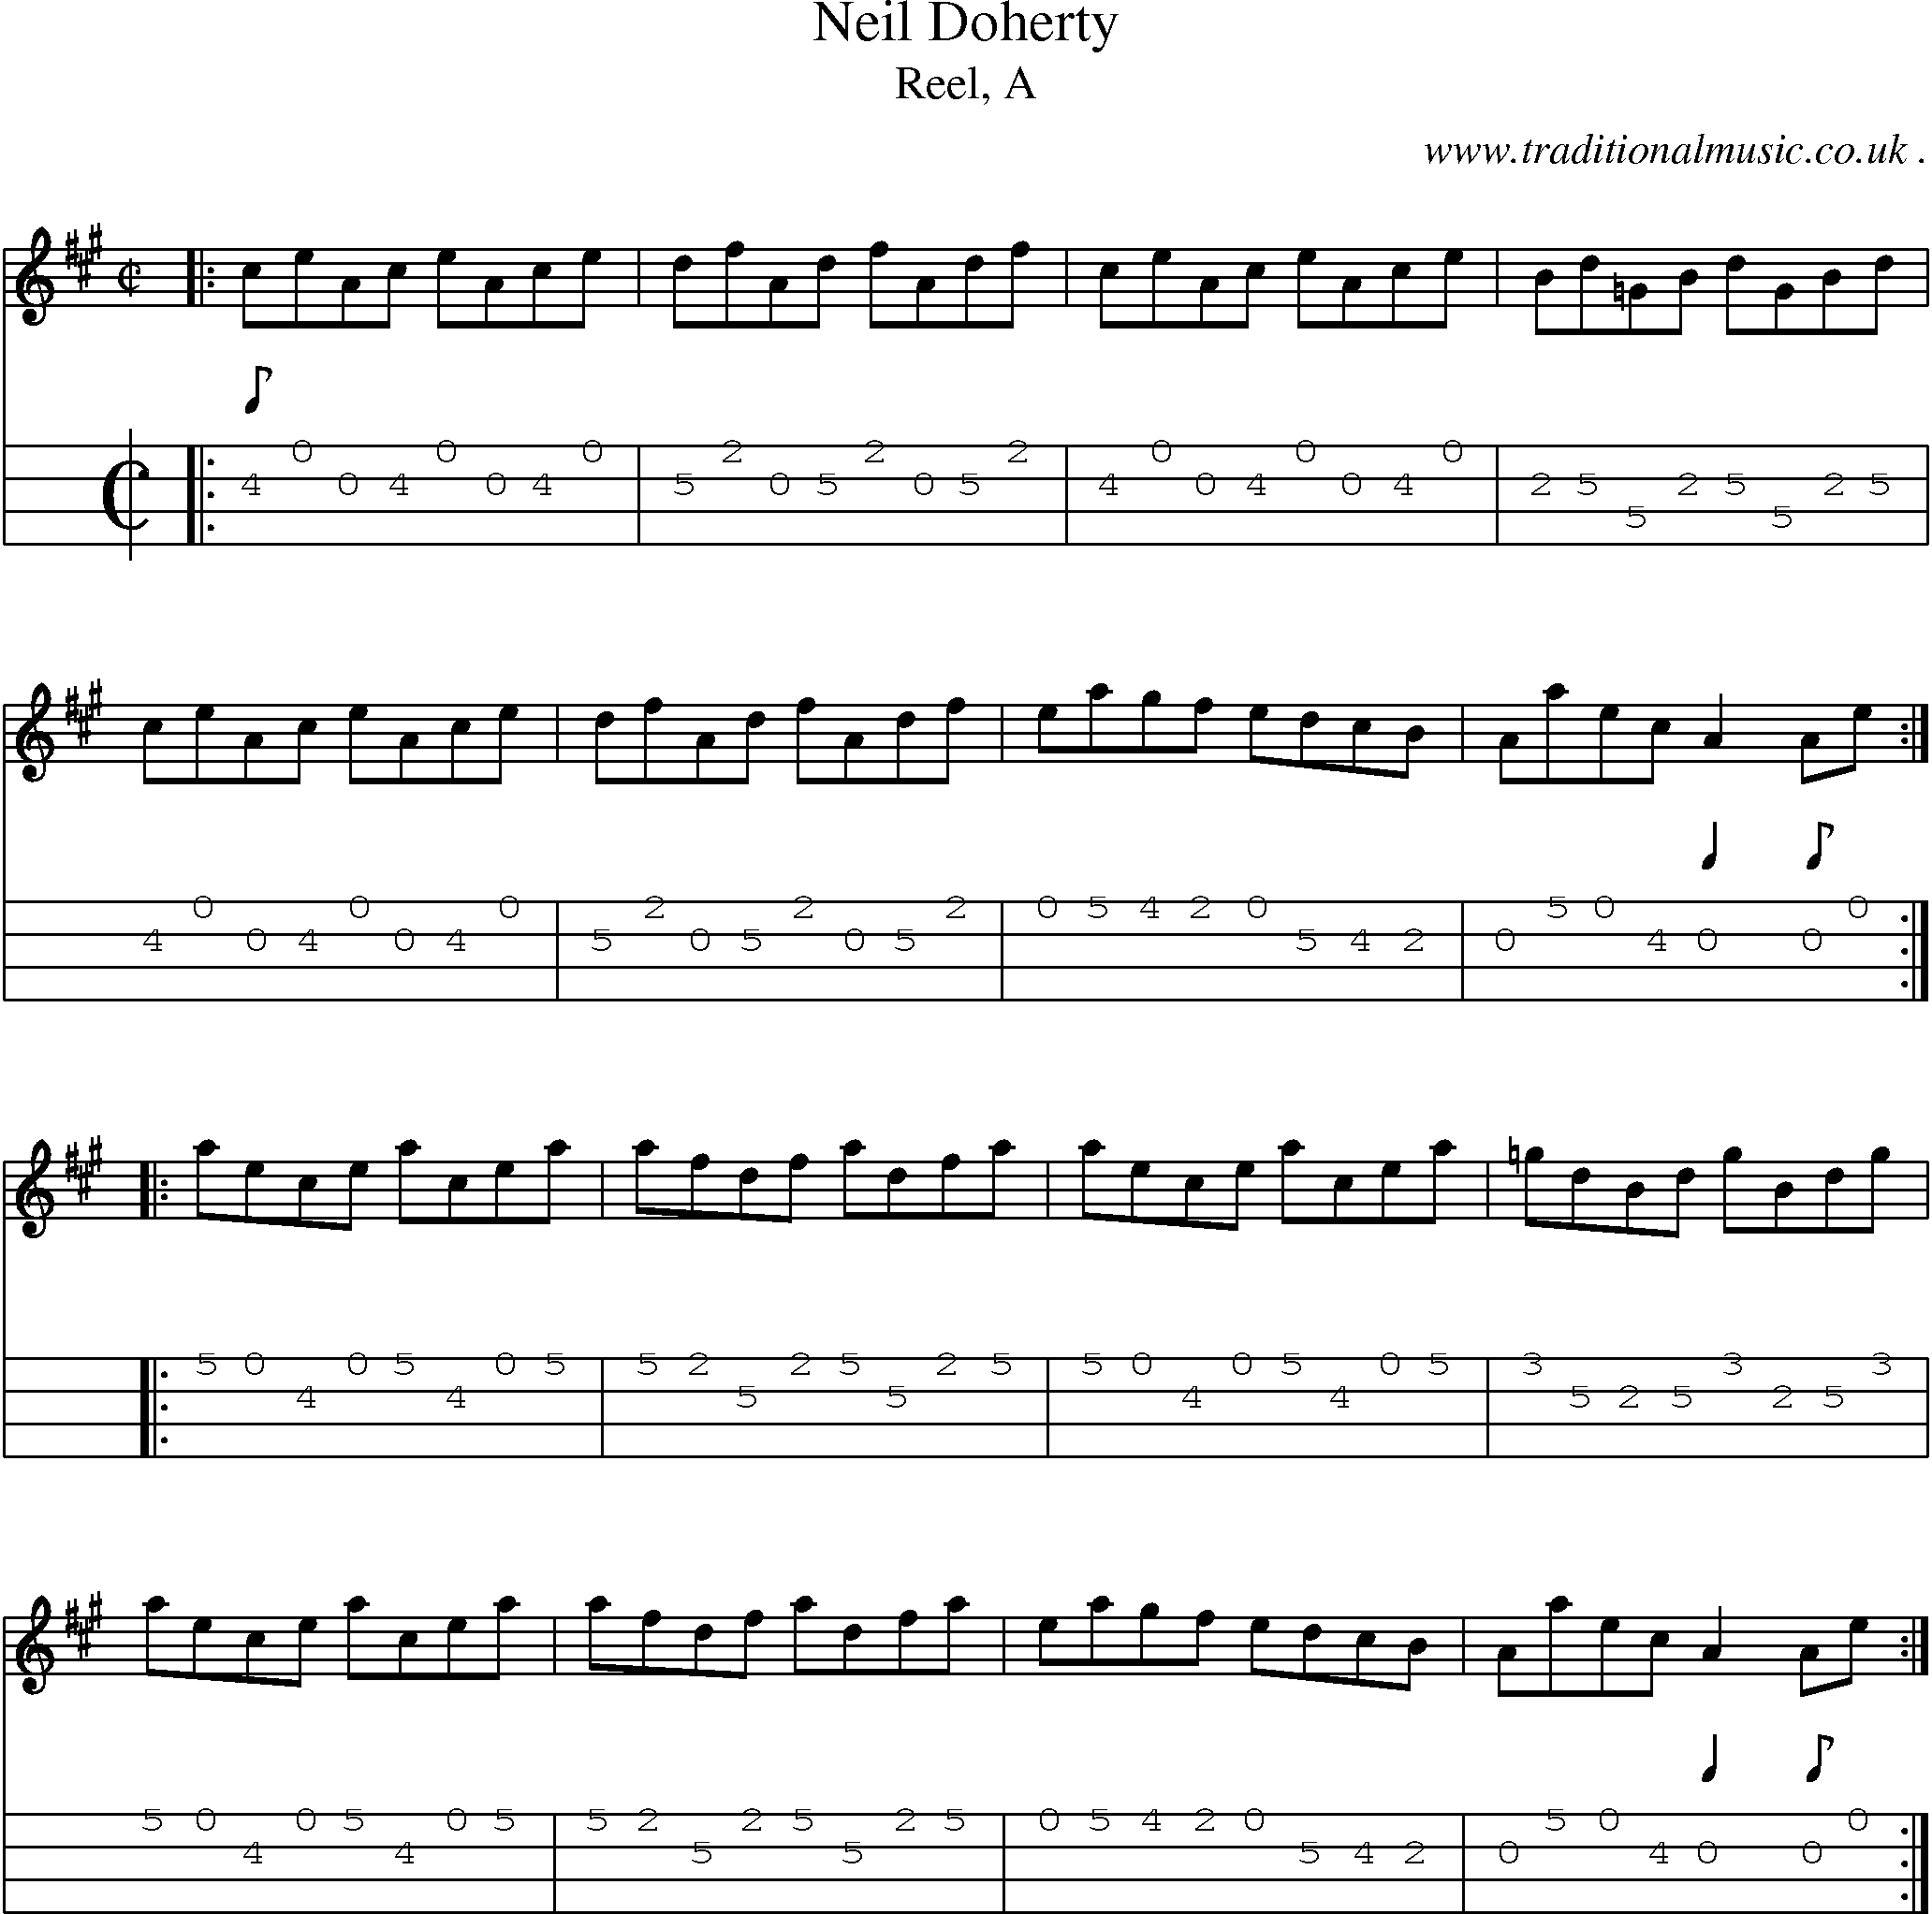 Sheet-music  score, Chords and Mandolin Tabs for Neil Doherty